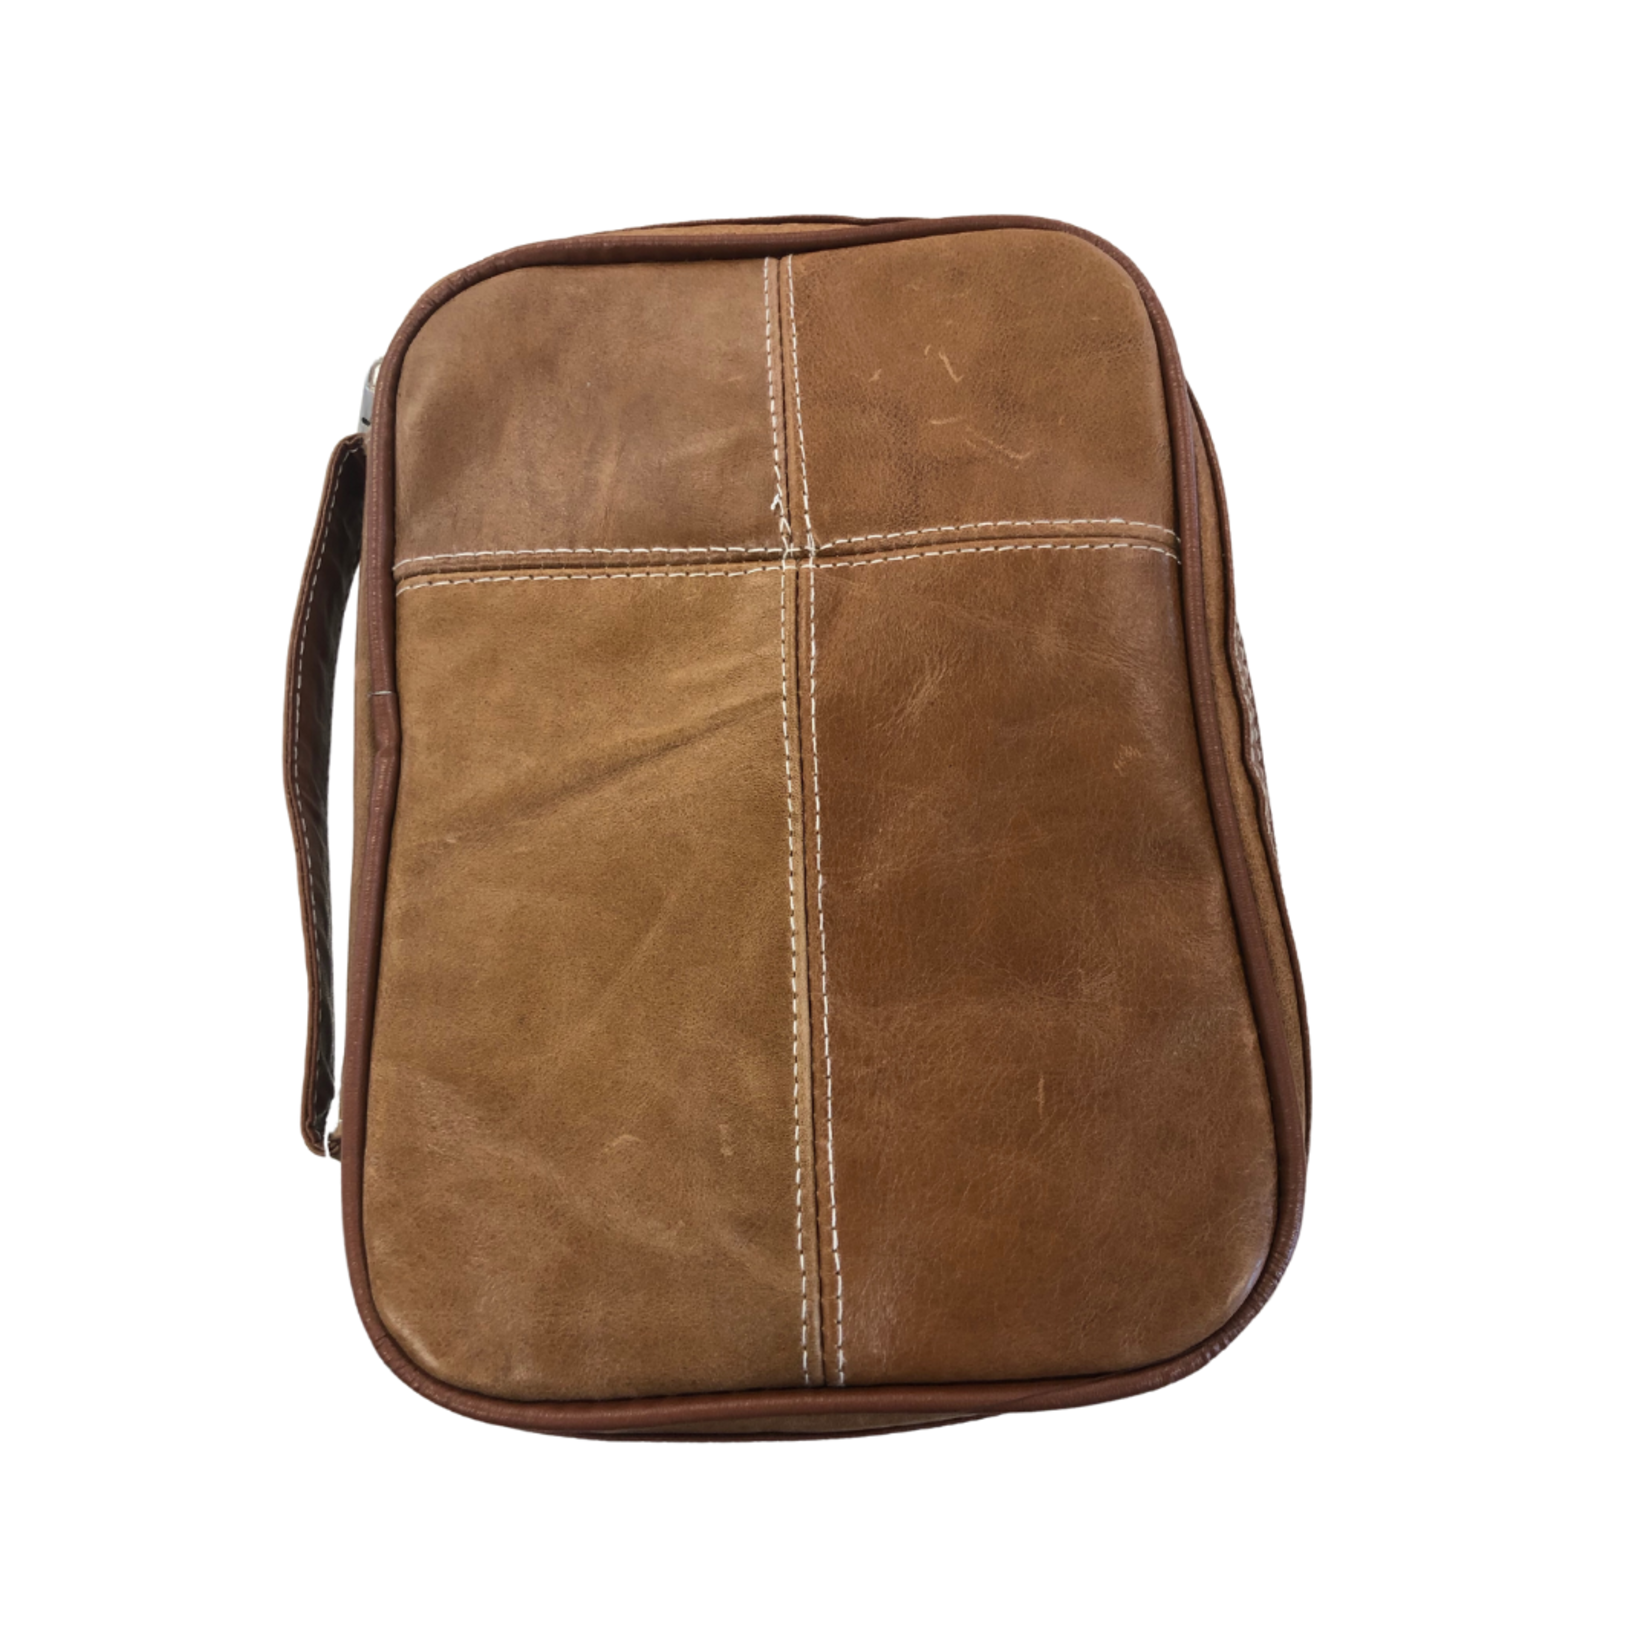 Distressed Brown Leather Bible Case